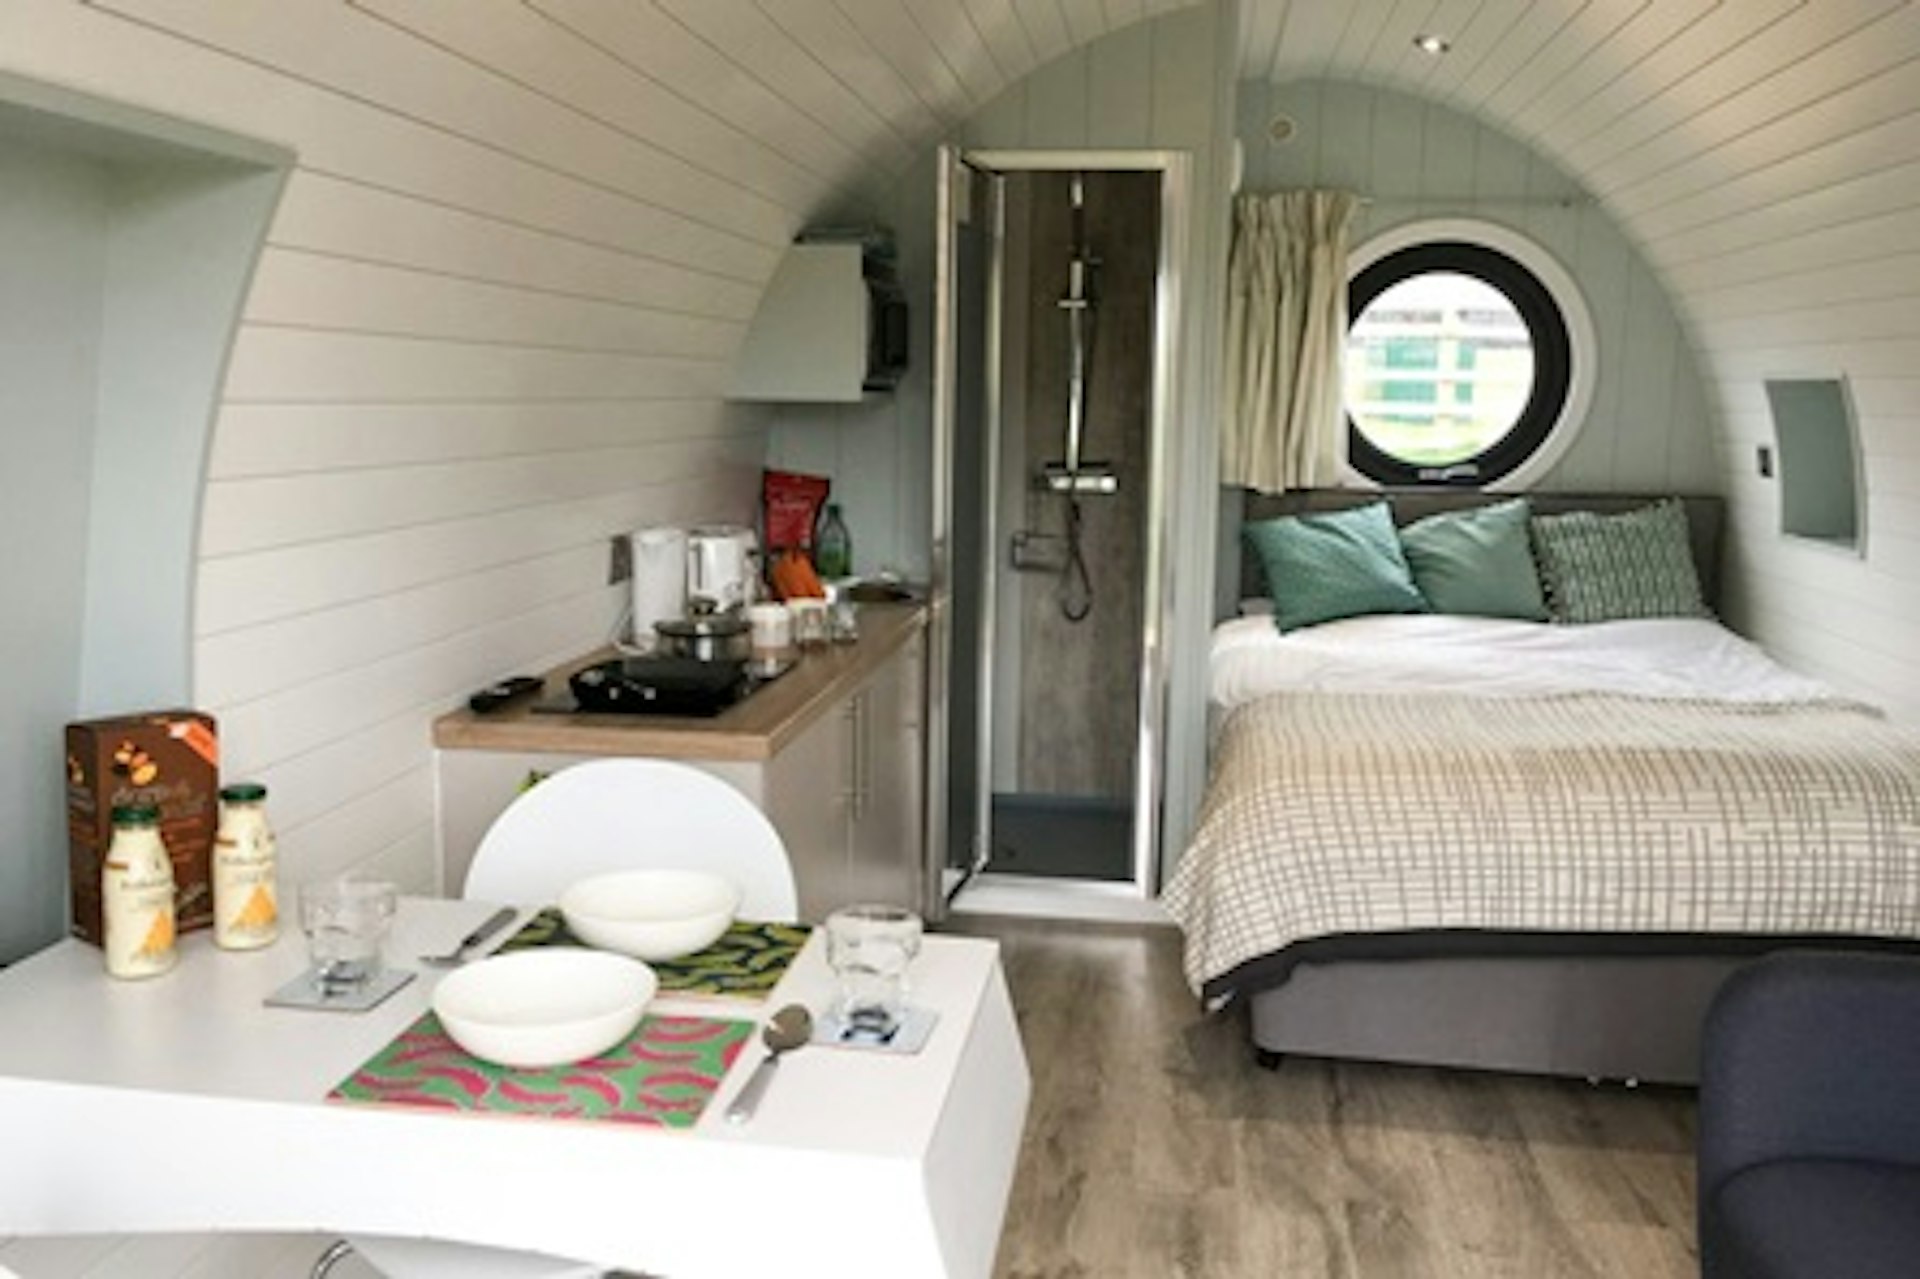 Three Night Luxury Glamping Pod Stay for Two at New Lodge Farm, Rockingham Forest 2